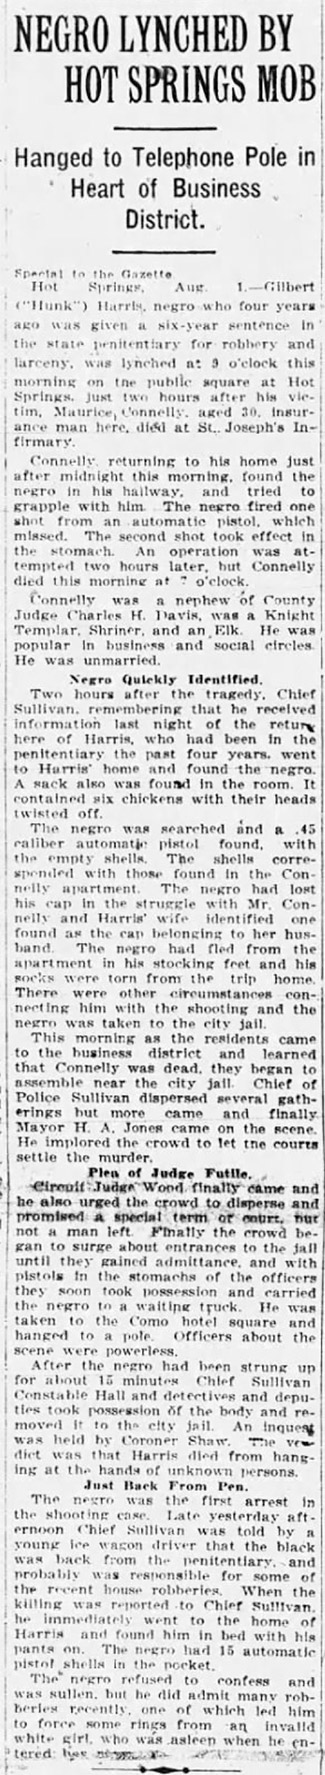 "Negro lynched by Hot Springs mob" newspaper clipping